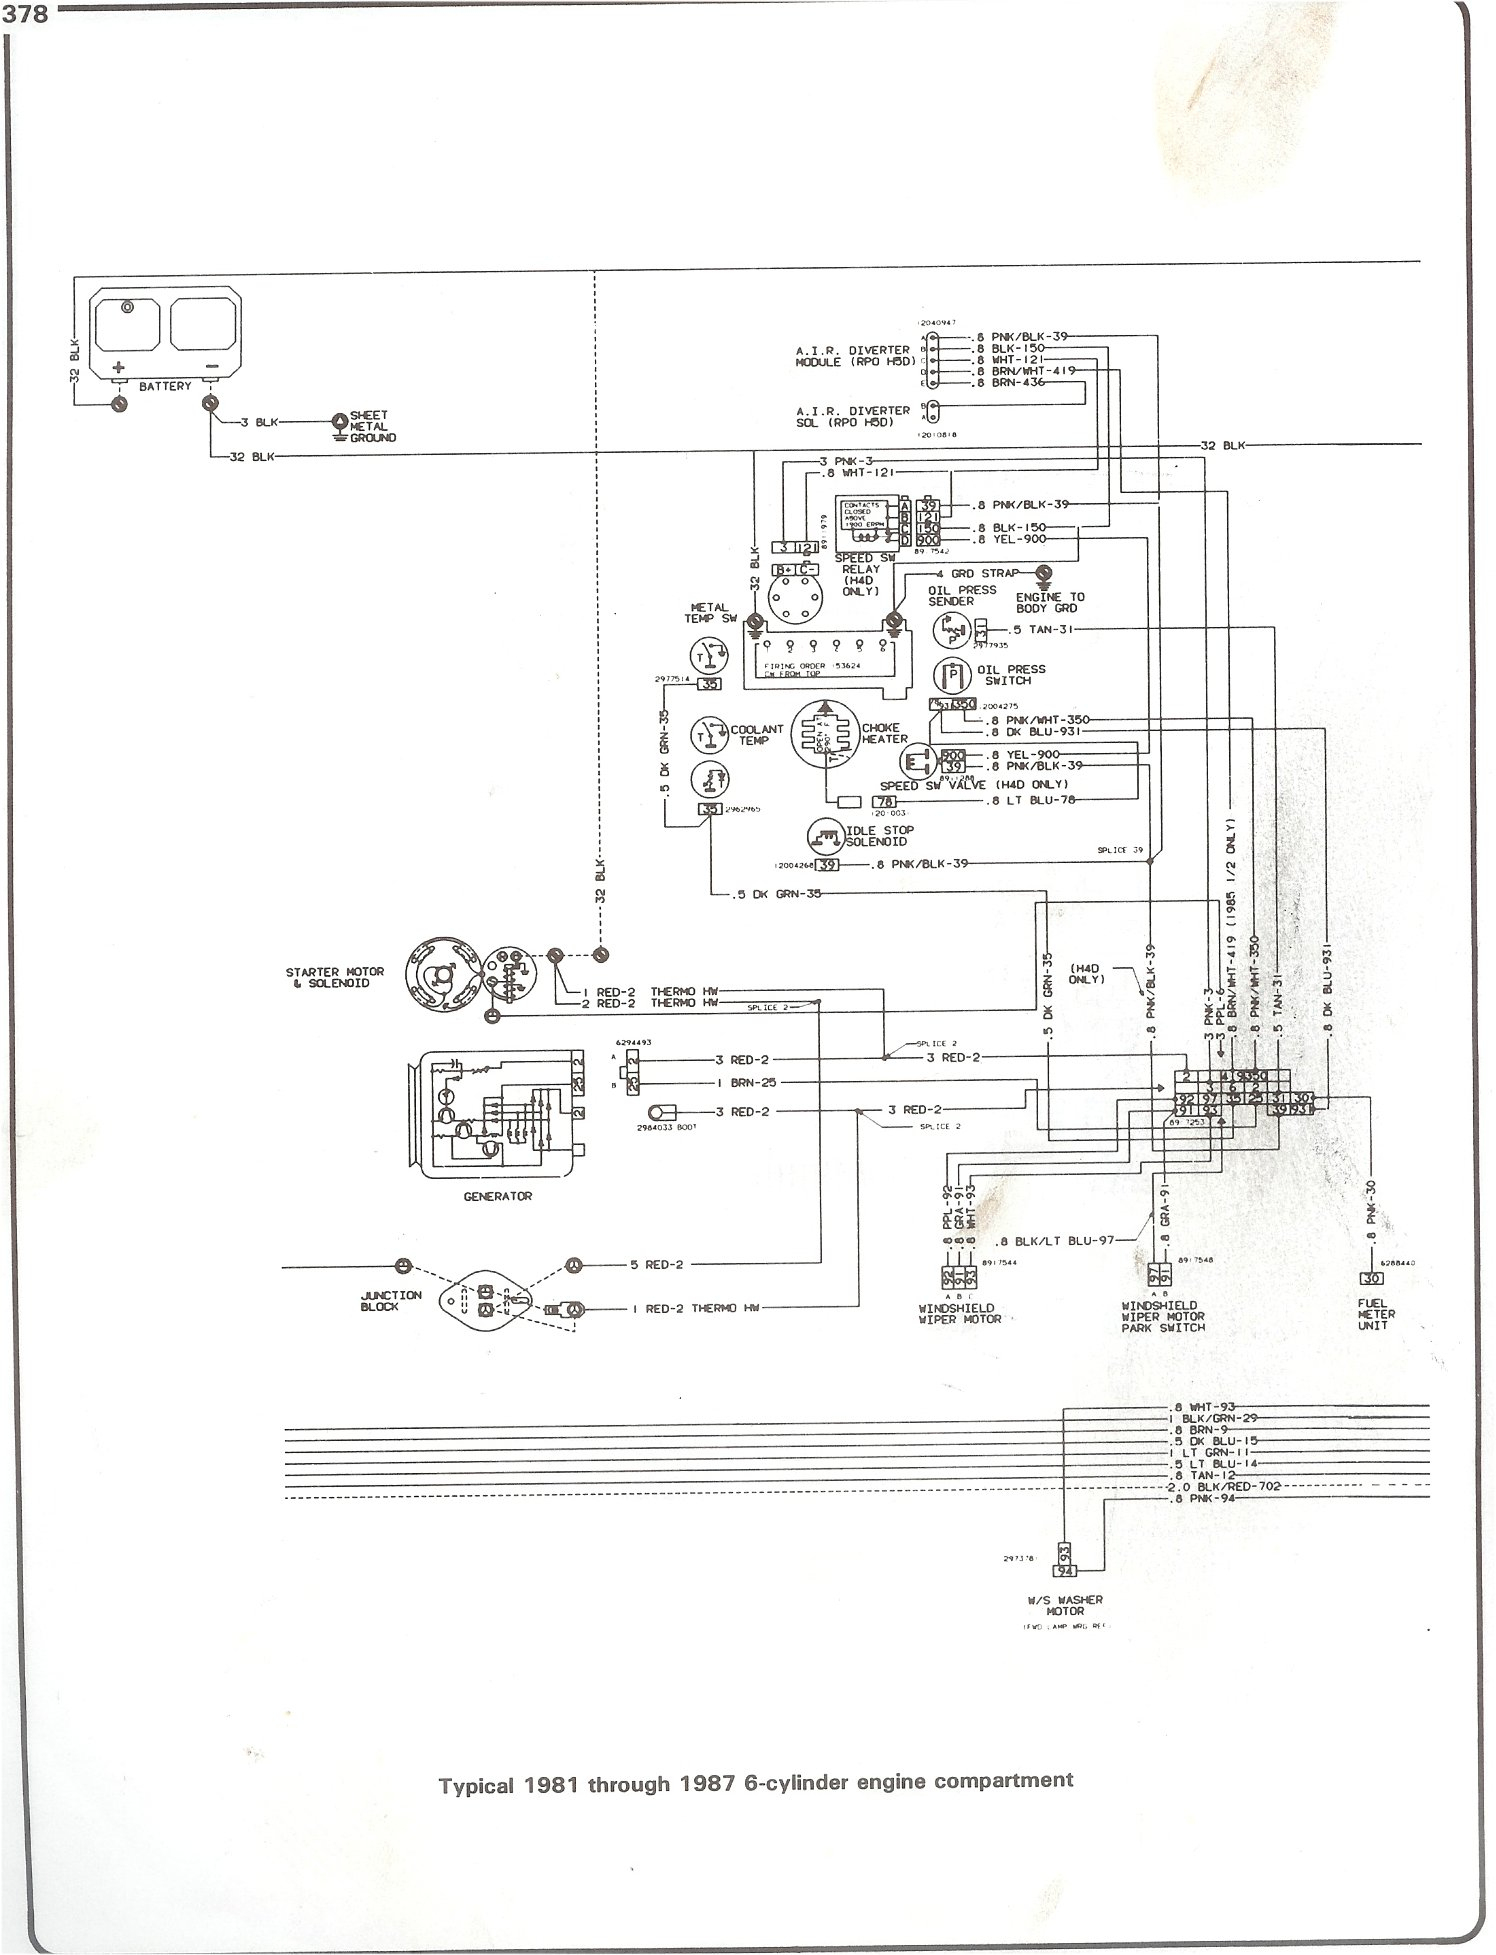 Complete 73-87 Wiring Diagrams - Ignition Wiring Diagram Chevy 350